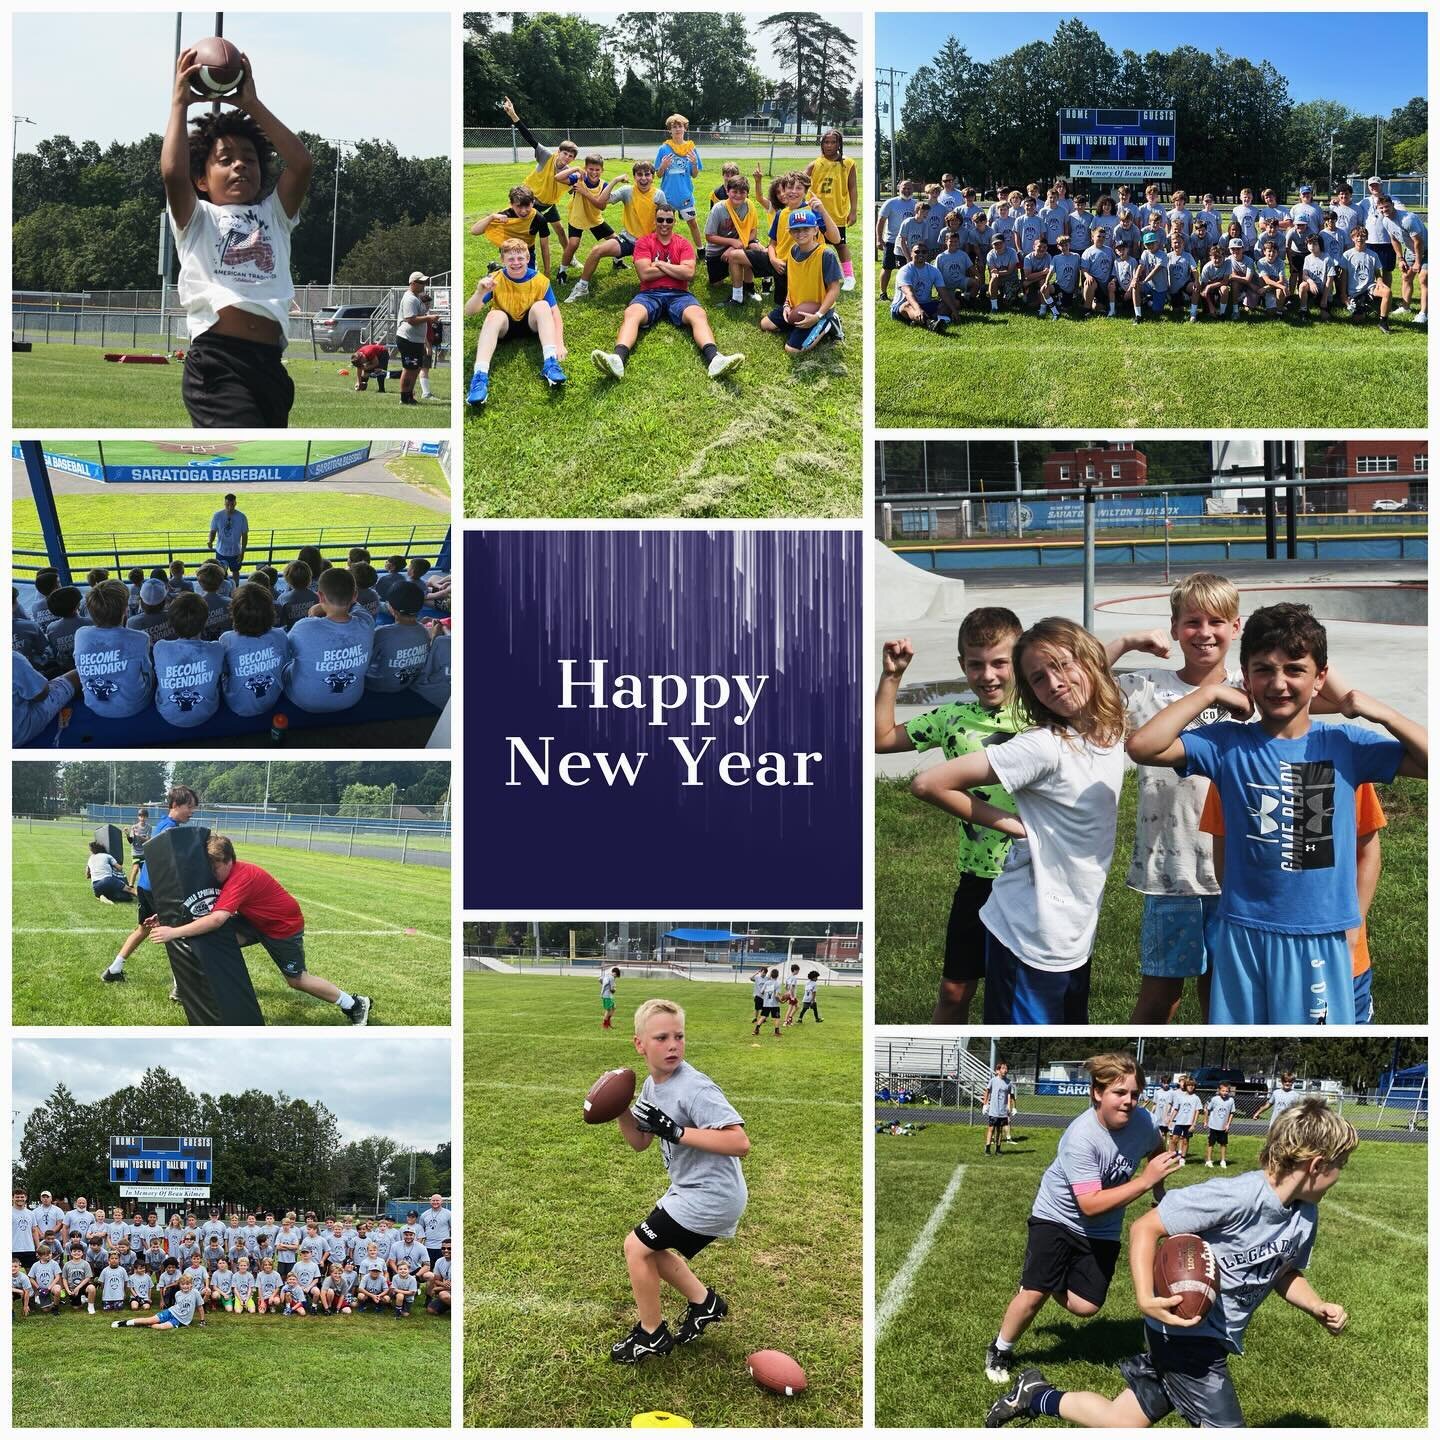 Legendary Sports Training would like to thank all of the families that made our camps so successful in 2023! Looking forward to providing you with another great summer of youth football camps! #youthfootball #summercamps #saratogasprings #saratogacou